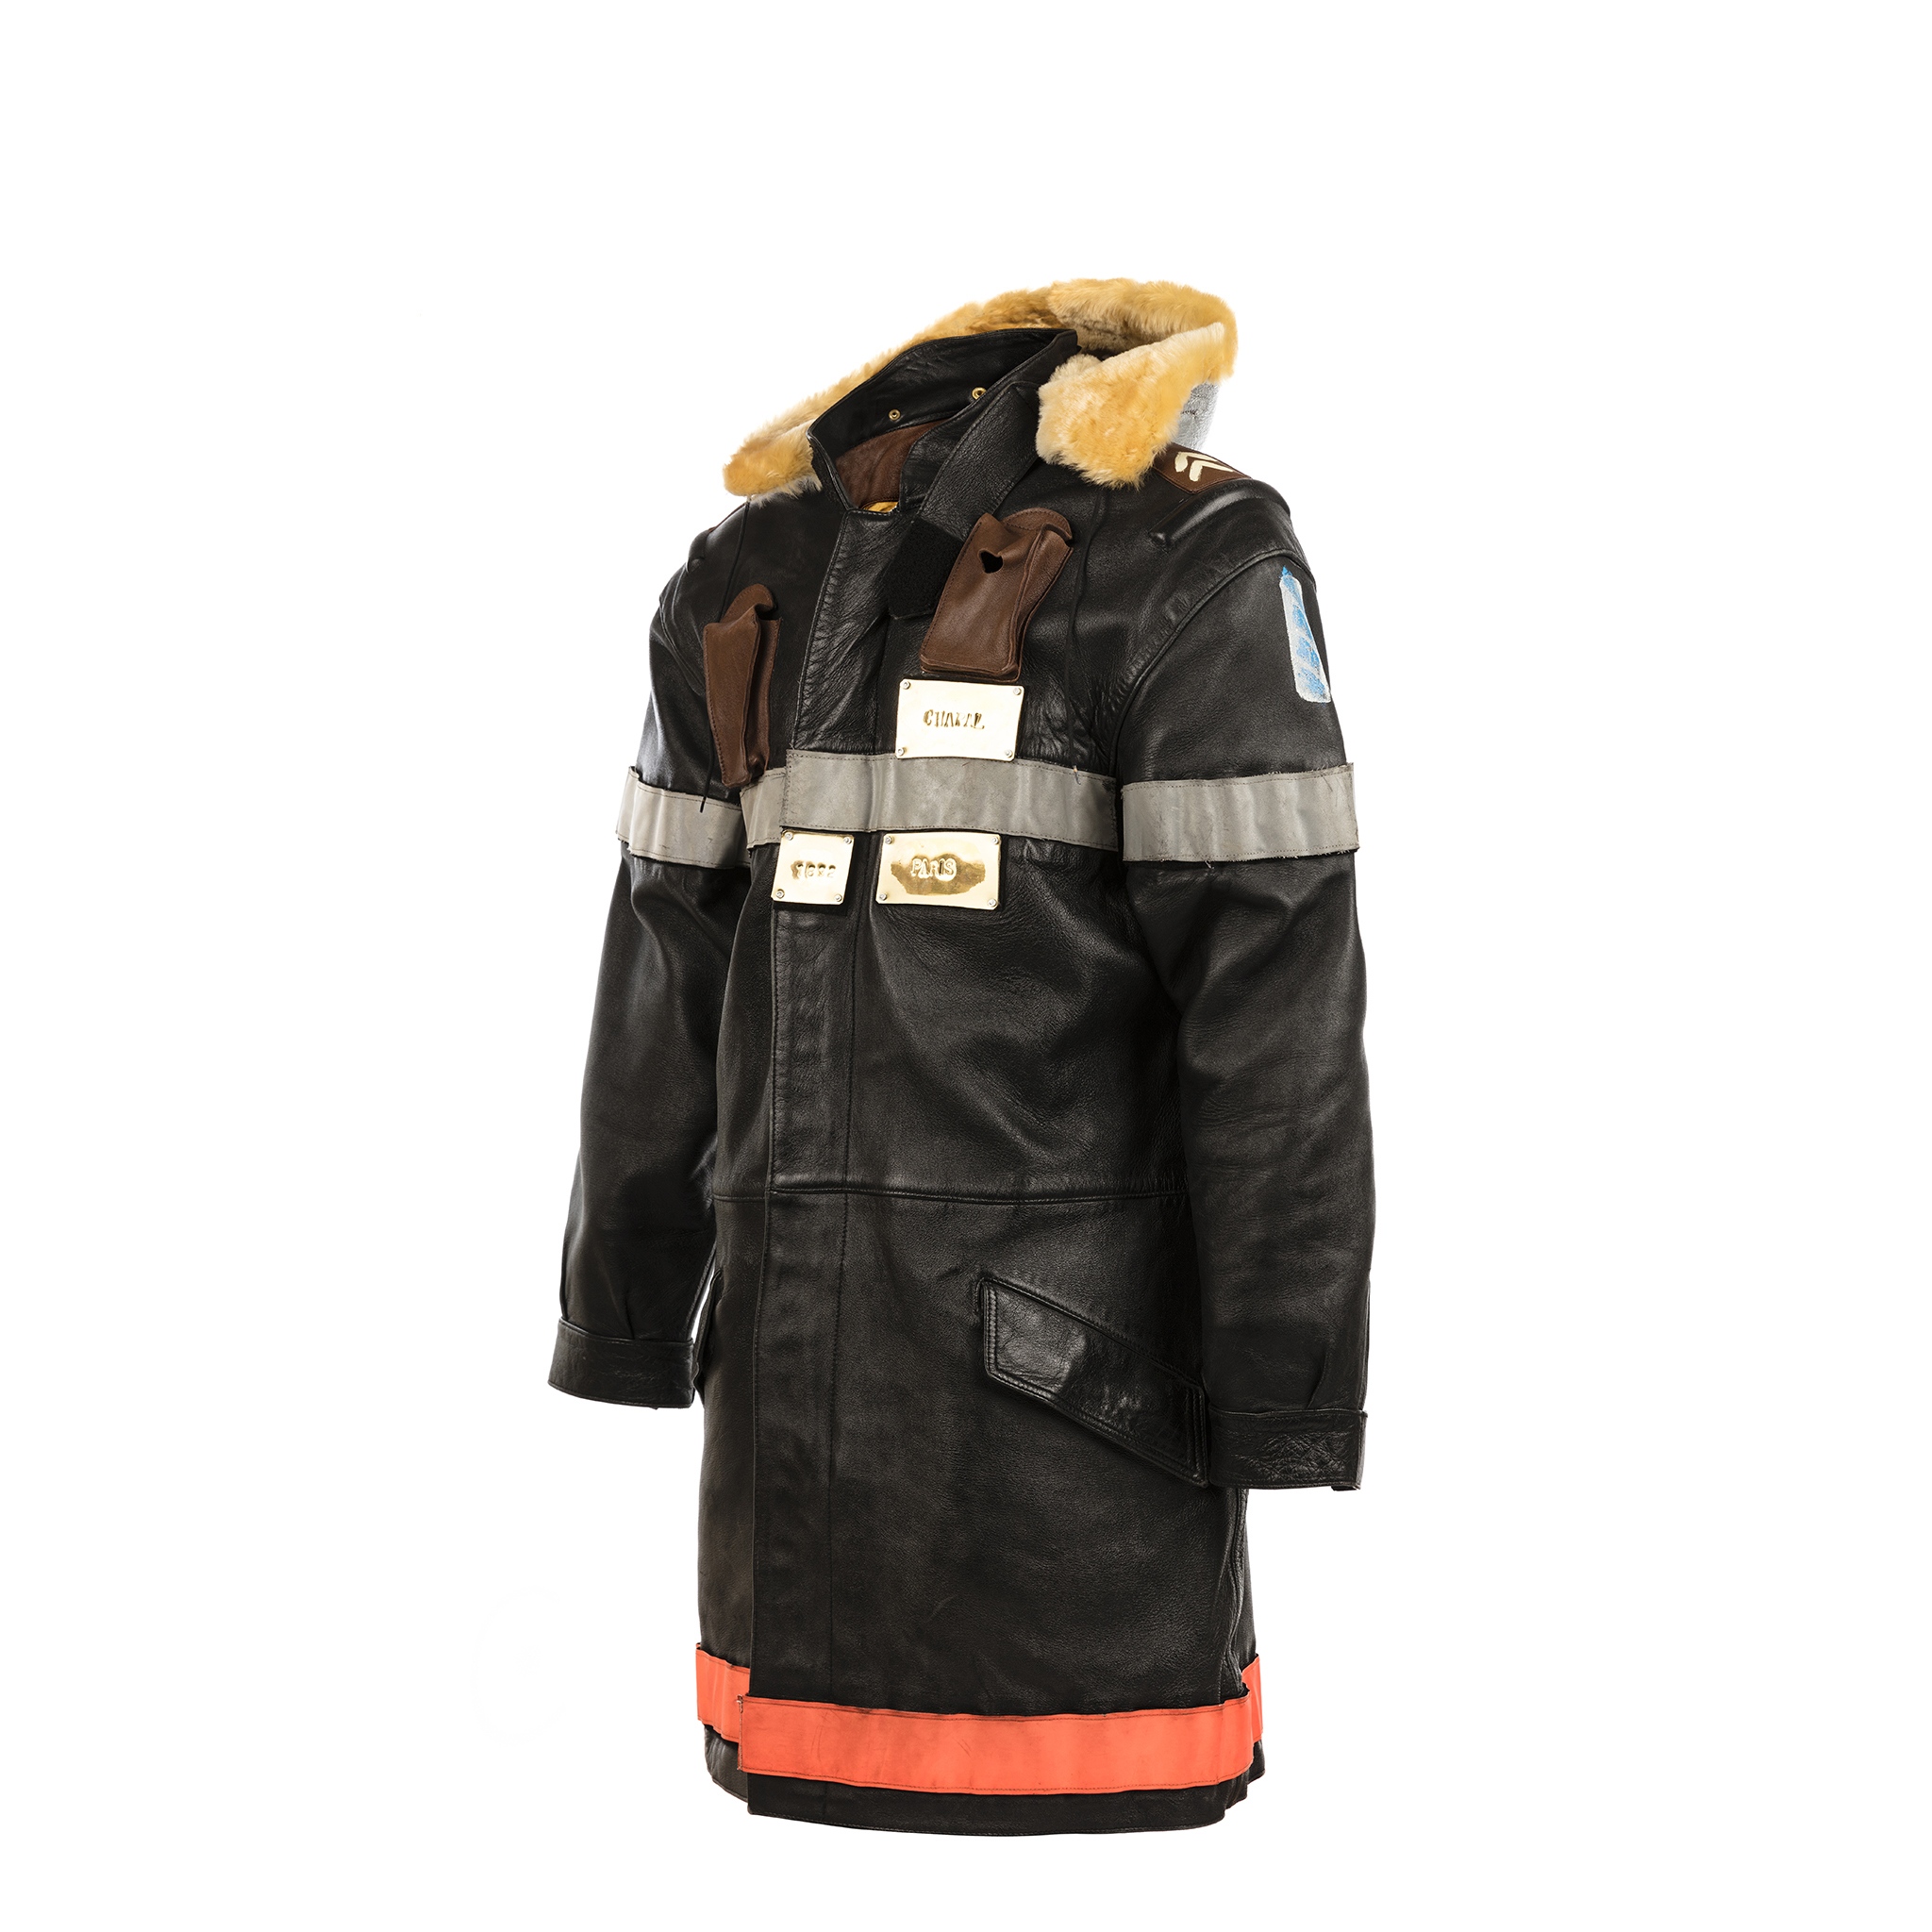 Firefighter Coat - Glossy leather - Black color